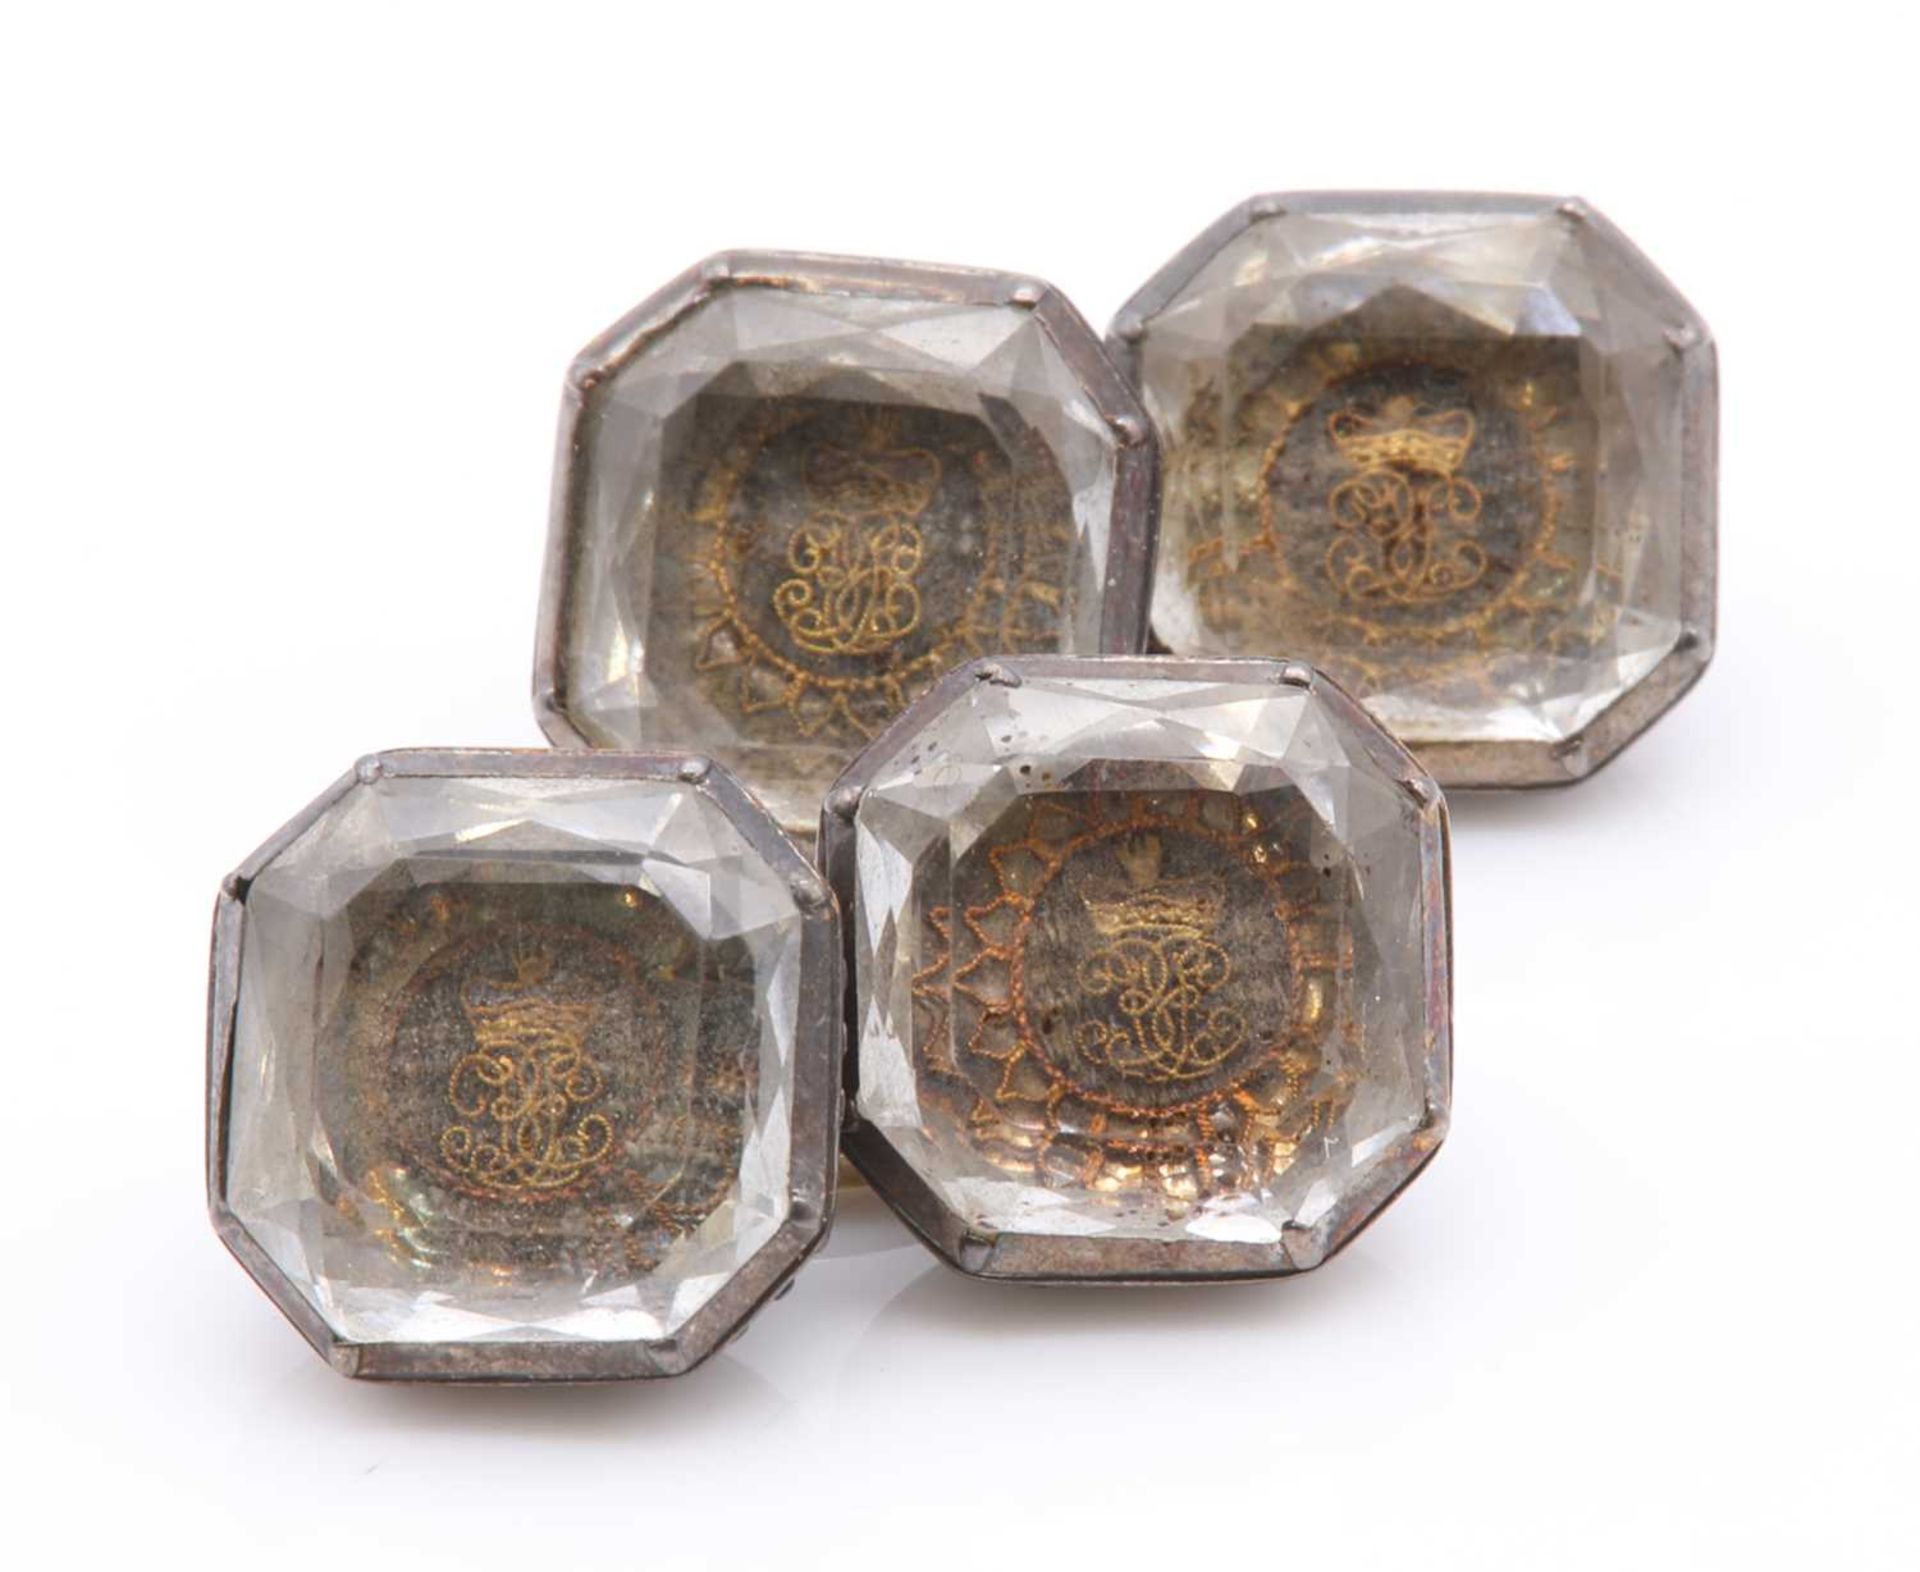 A pair of silver and gold 'Stuart crystal' memorial cufflinks, c.1700,